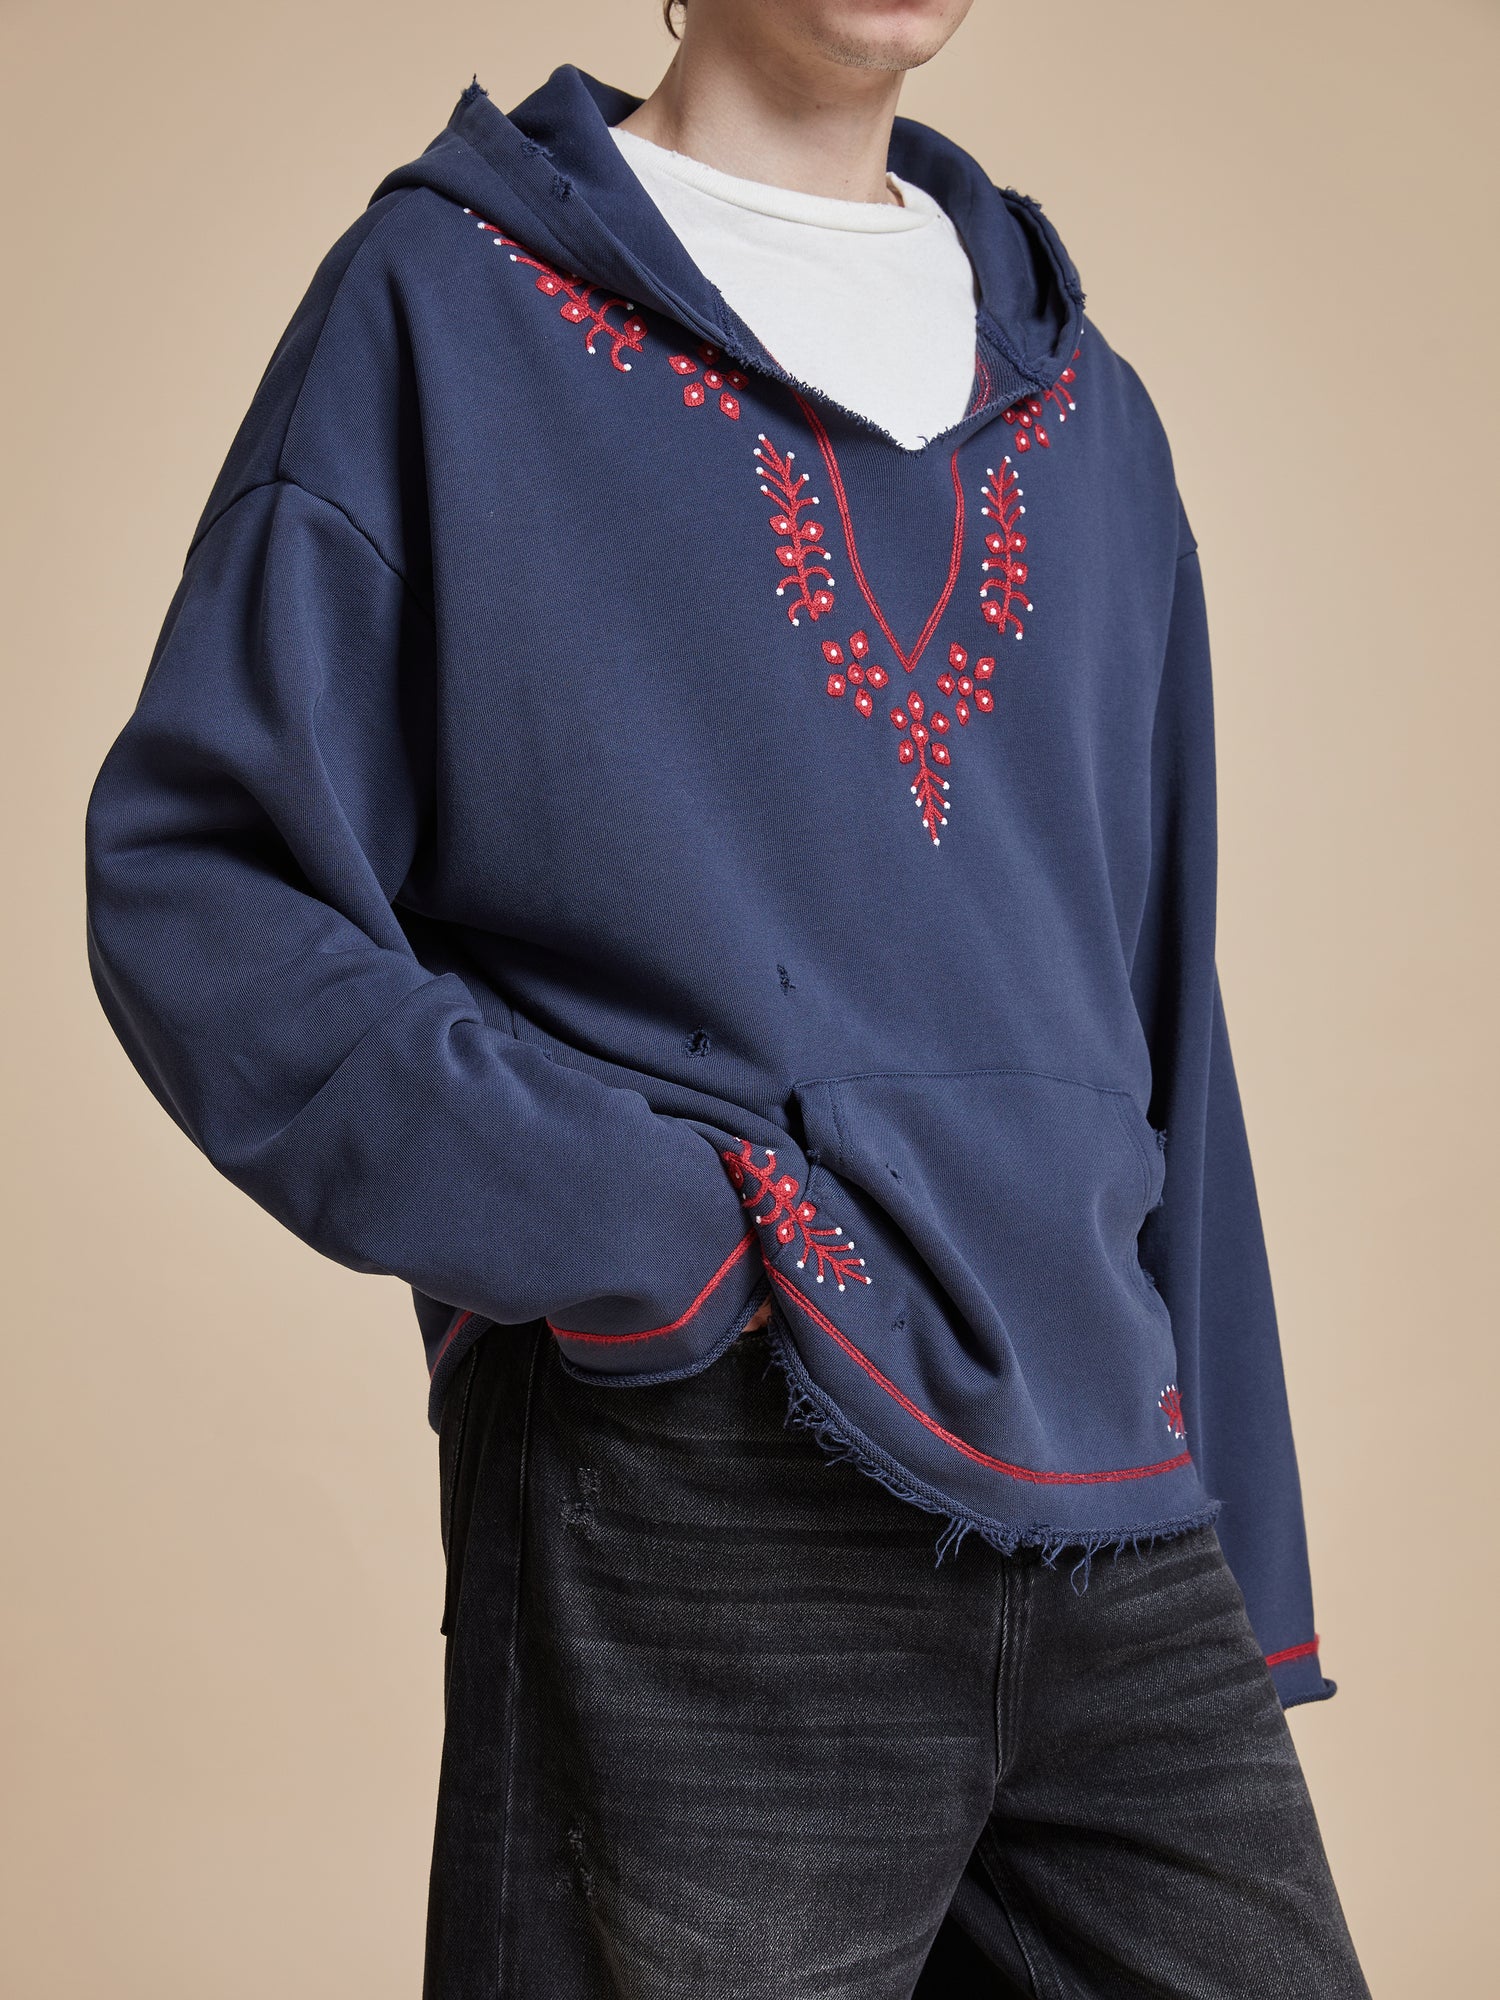 The model is wearing a Found Indus Embroidered Hoodie.